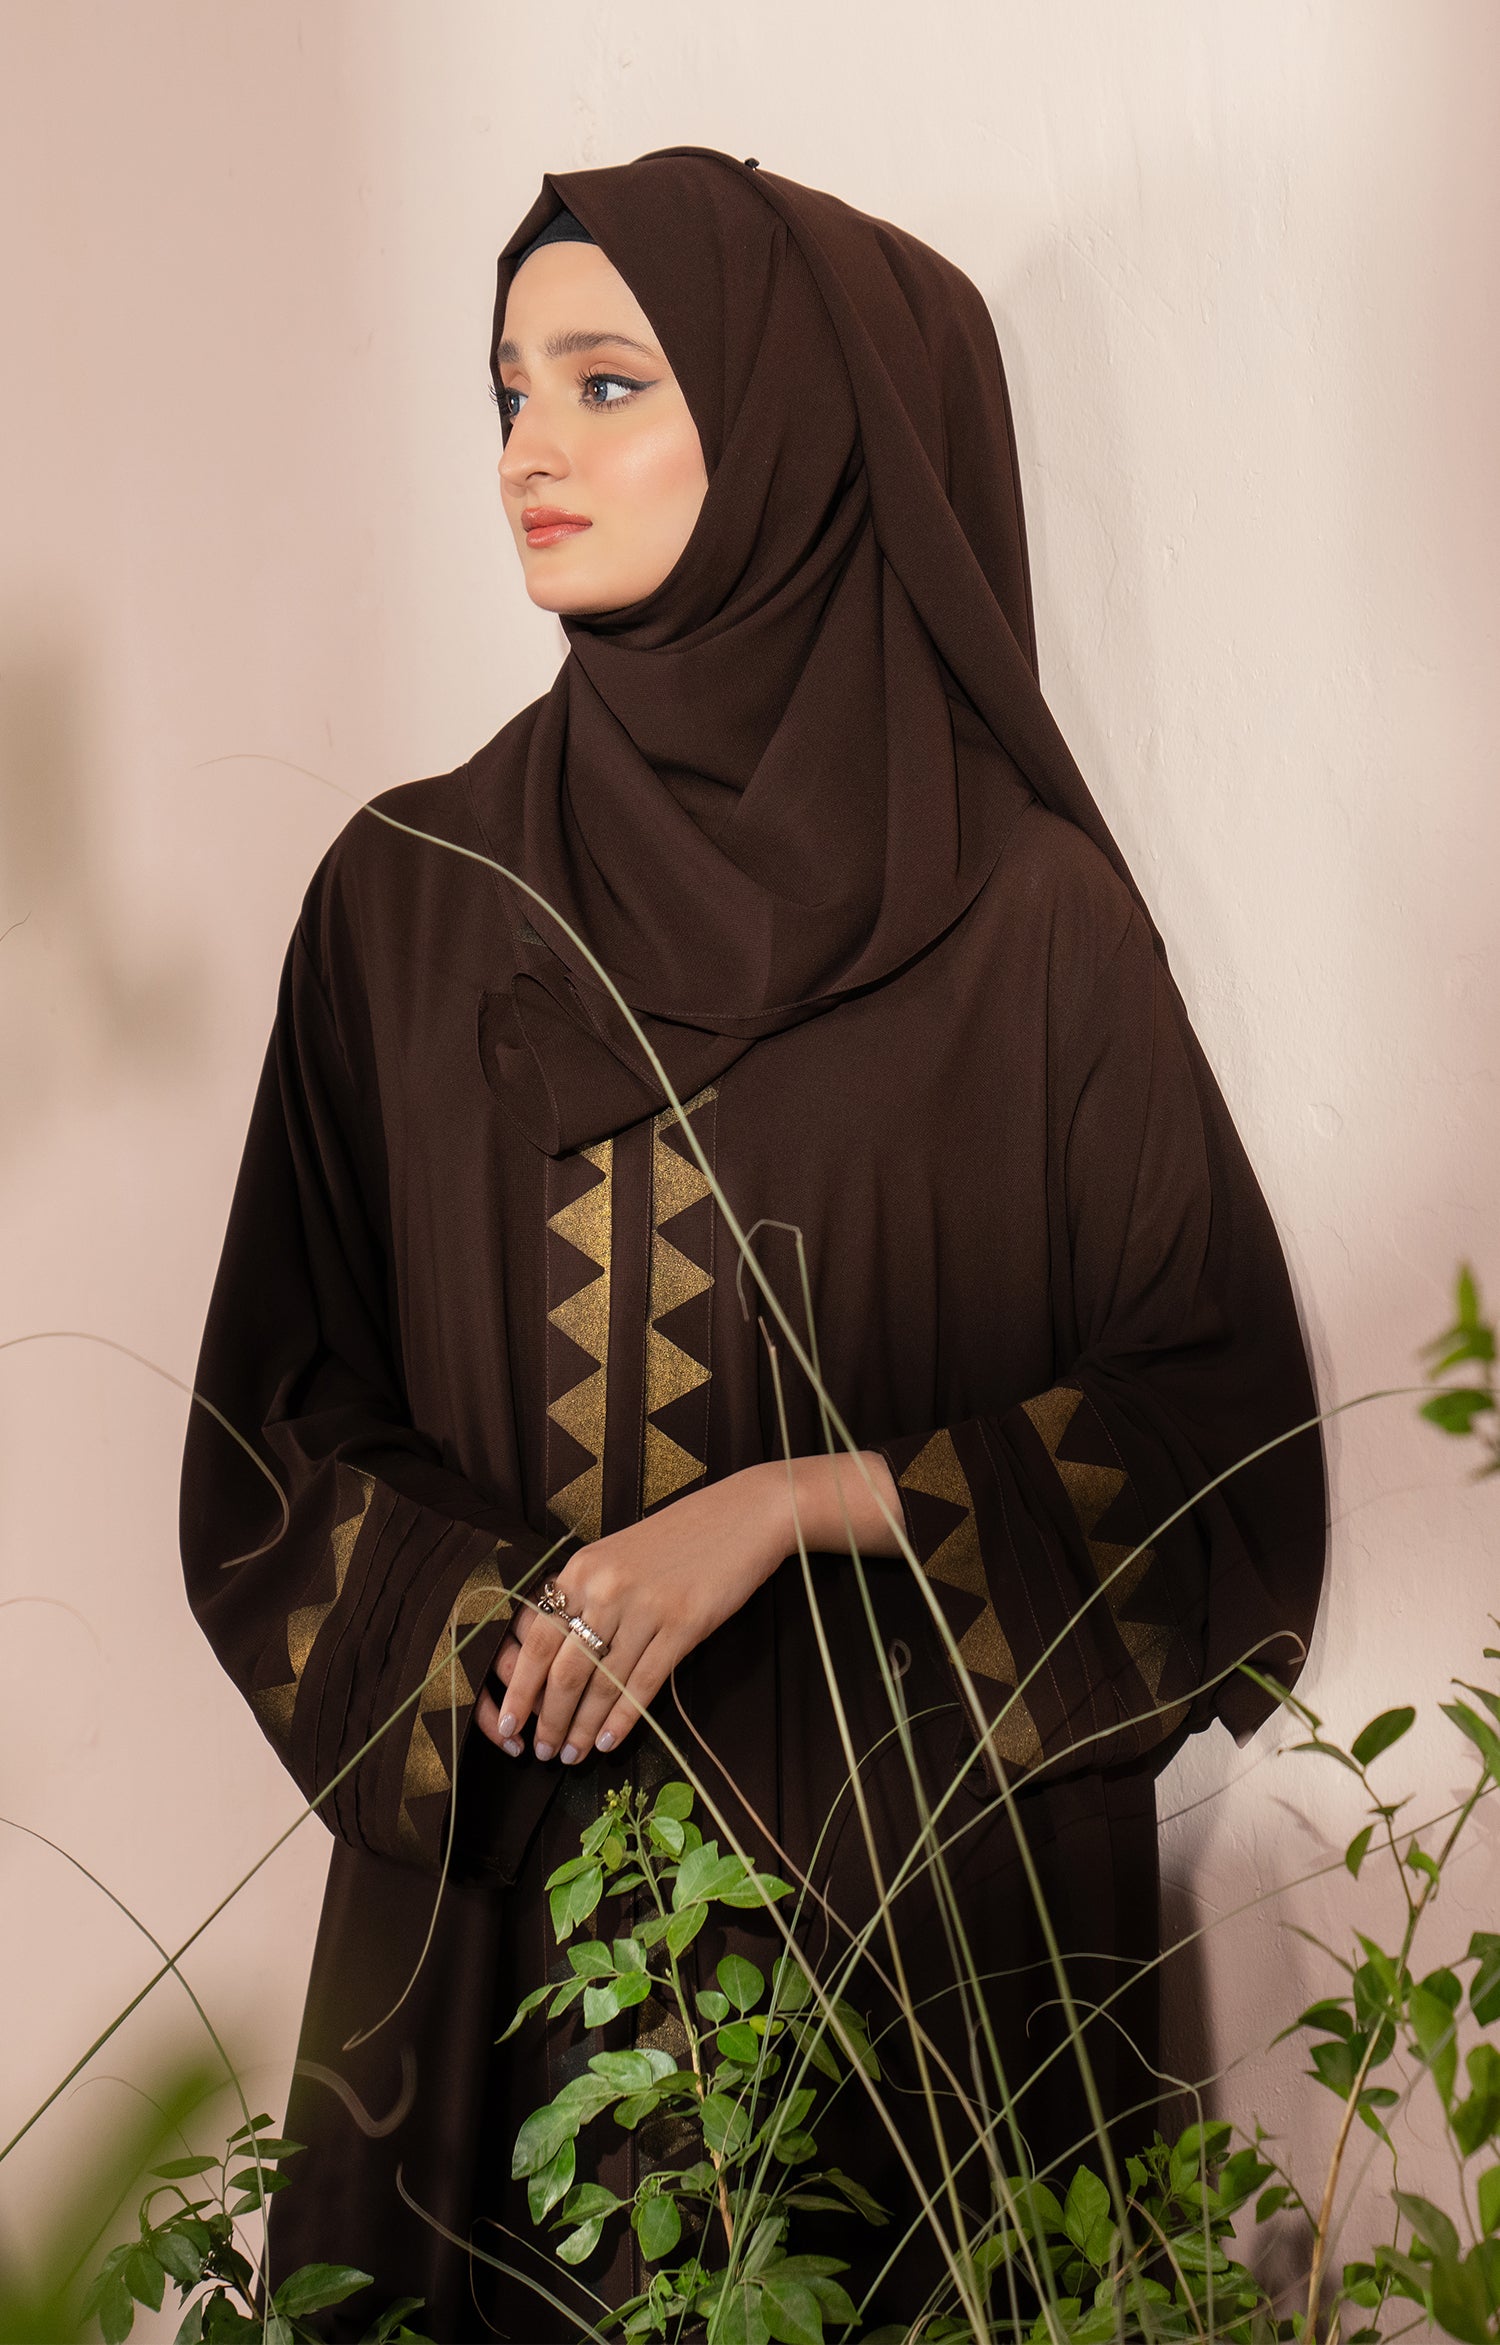 BROWN ROUGE FRONT OPEN ABAYA